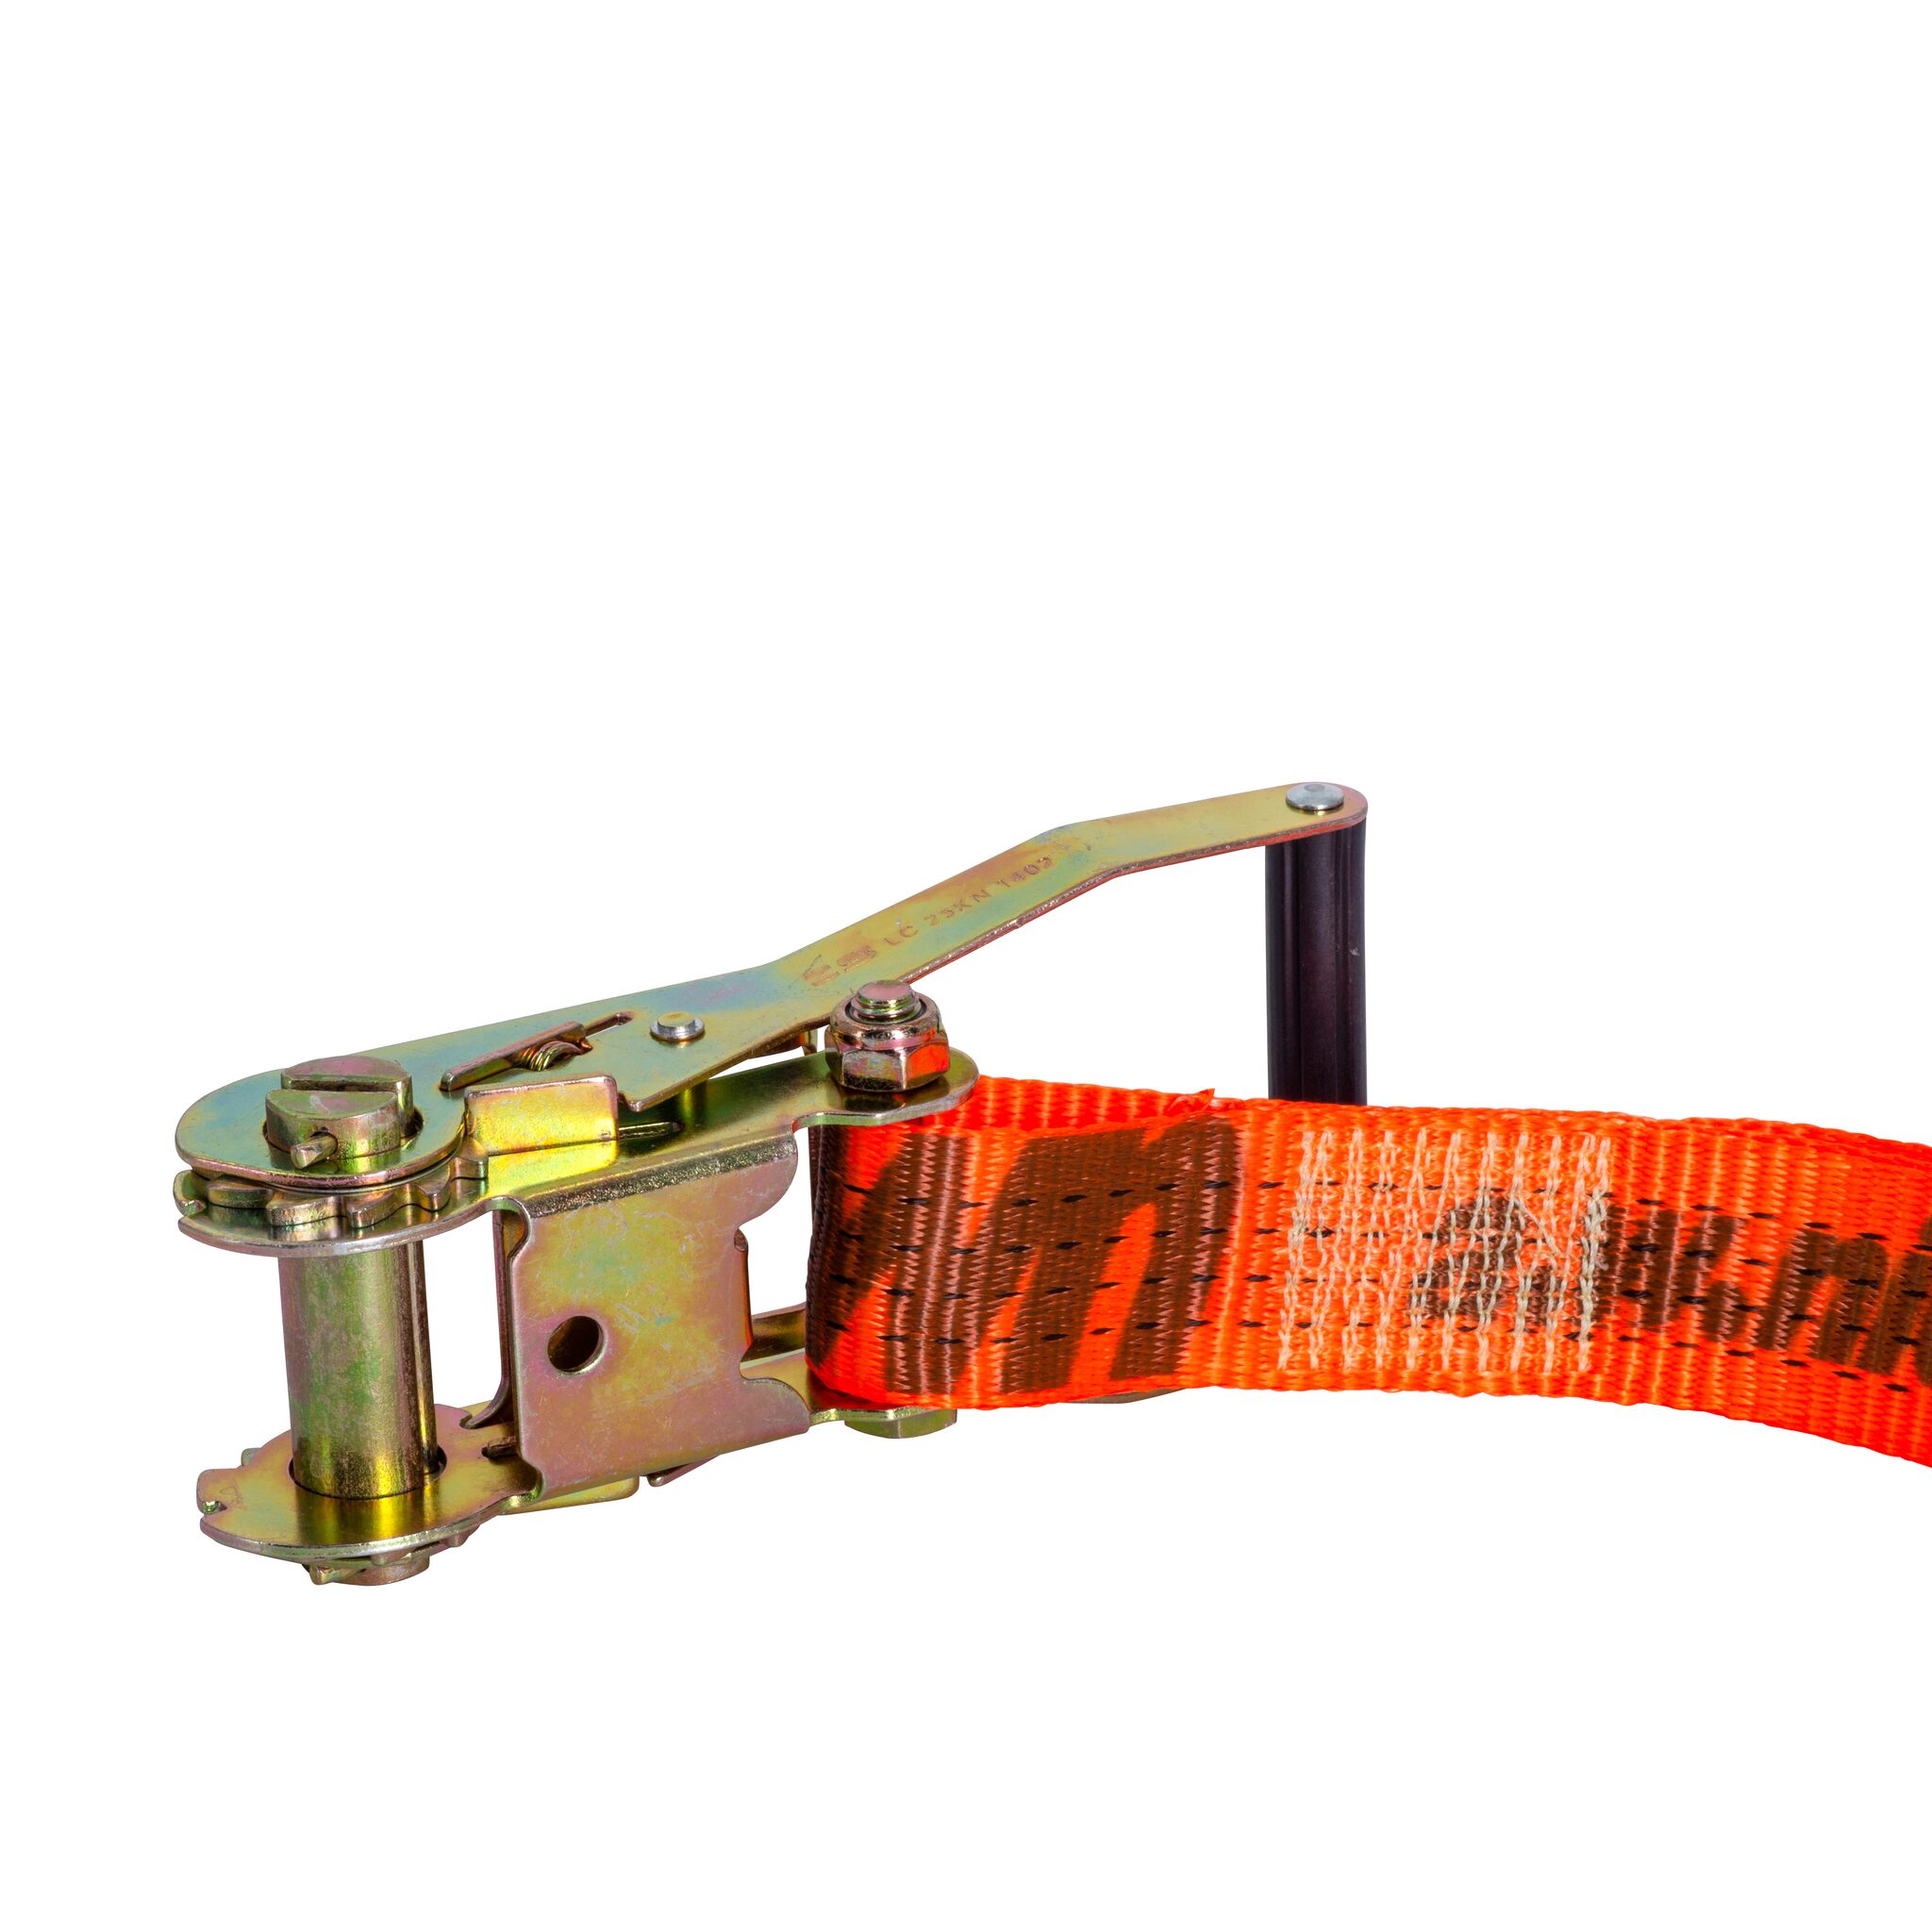 awn Ratchet Lashing Strap with Hook